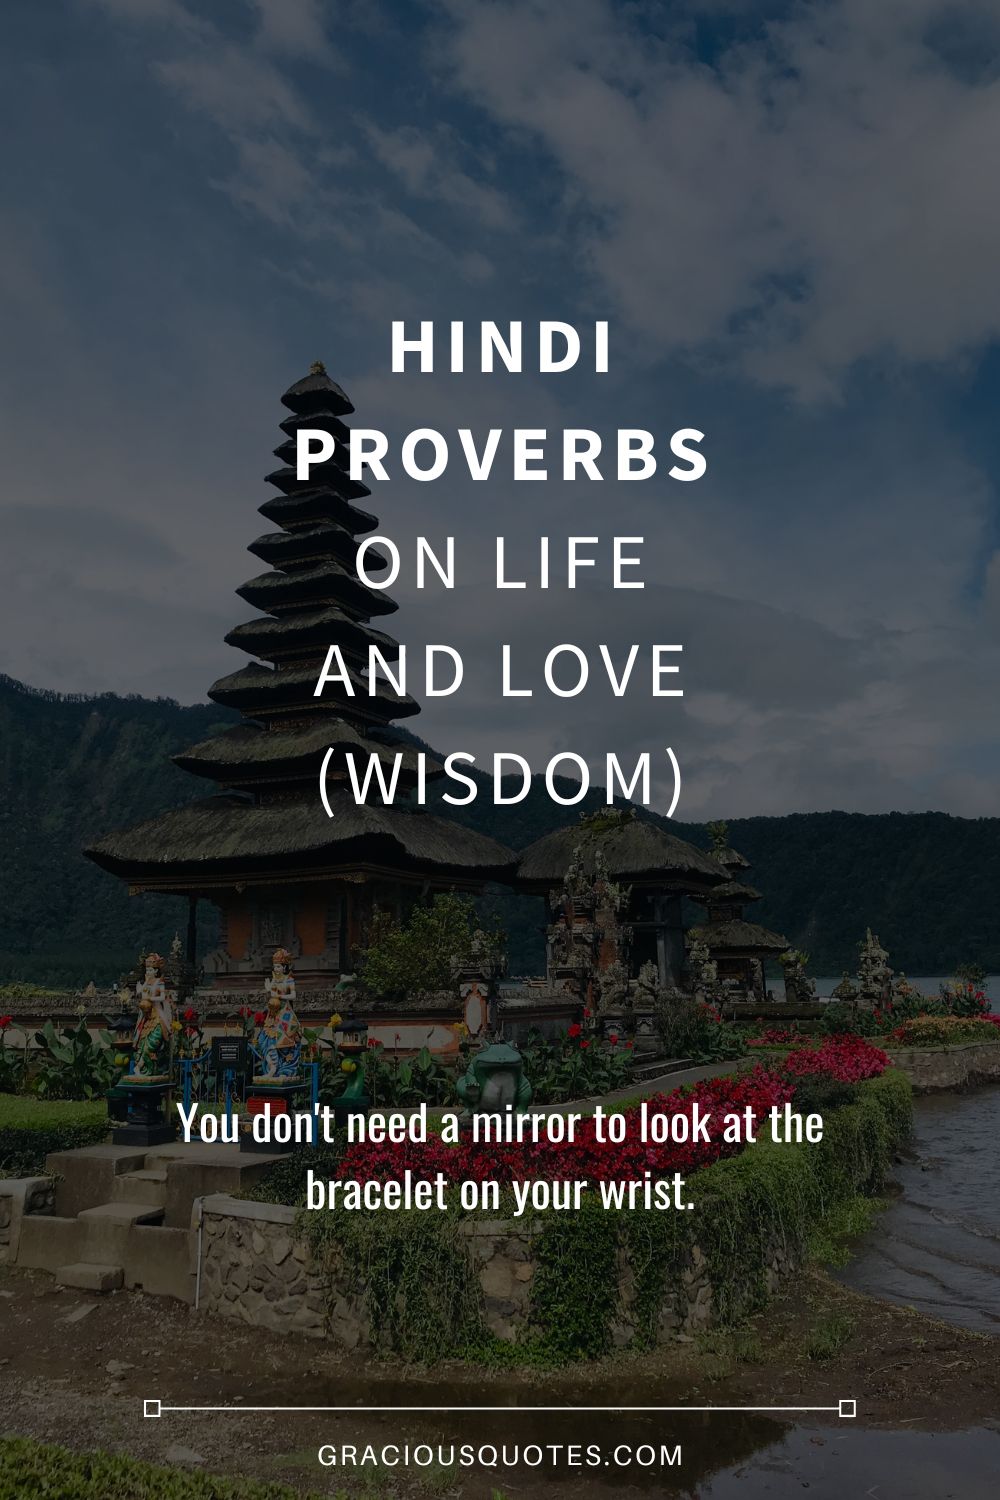 Hindi Proverbs on Life and Love (WISDOM) - Gracious Quotes